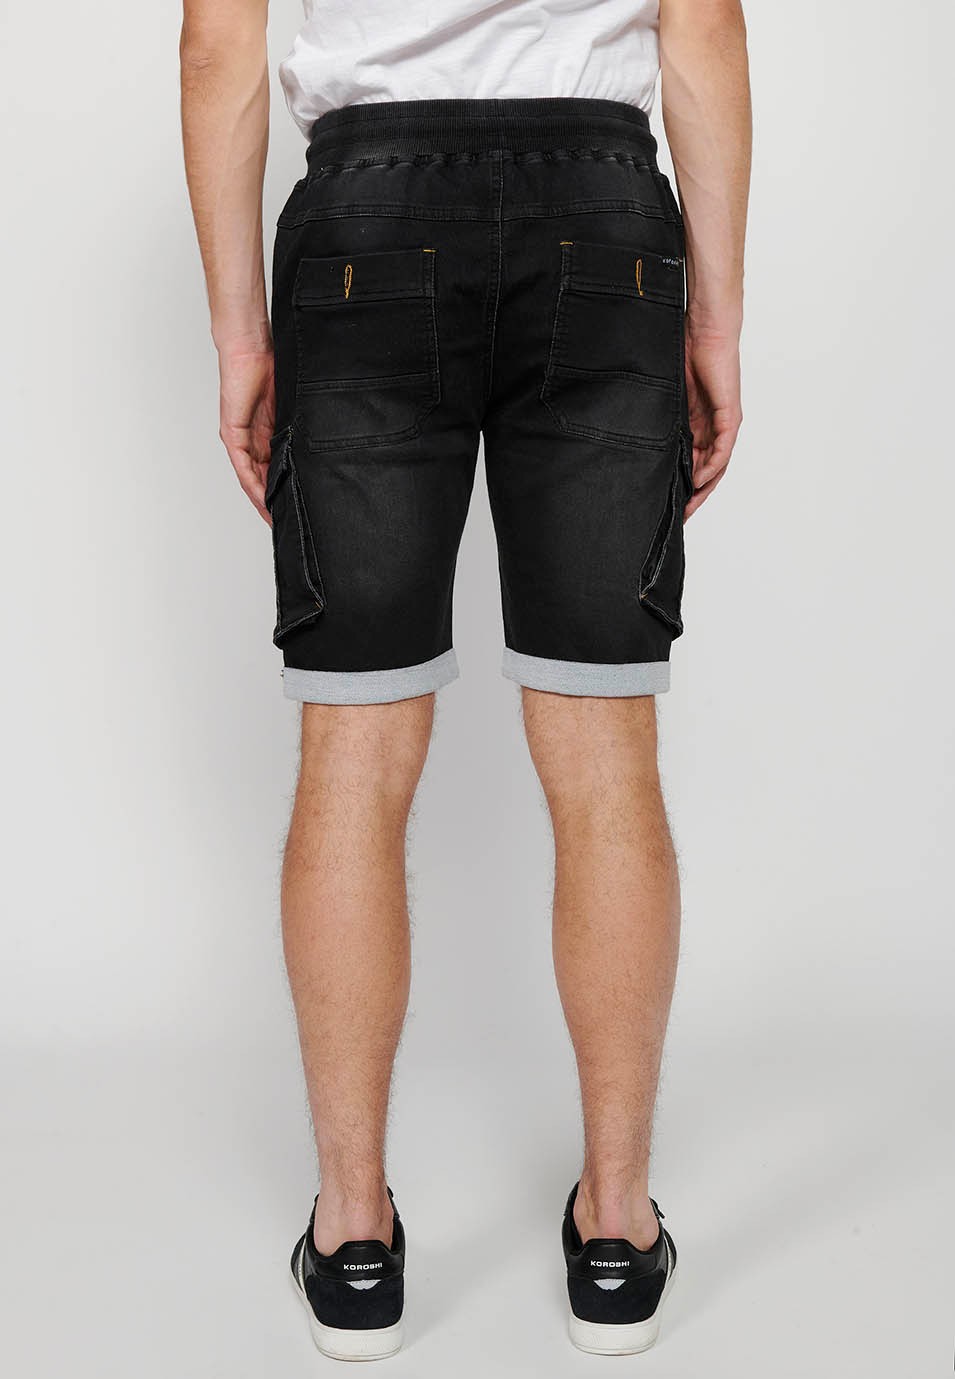 Denim Bermuda cargo jogger shorts finished with a turn-up, Adjustable waist with elastic and drawstring, Side pockets with flap, Black for Men 3